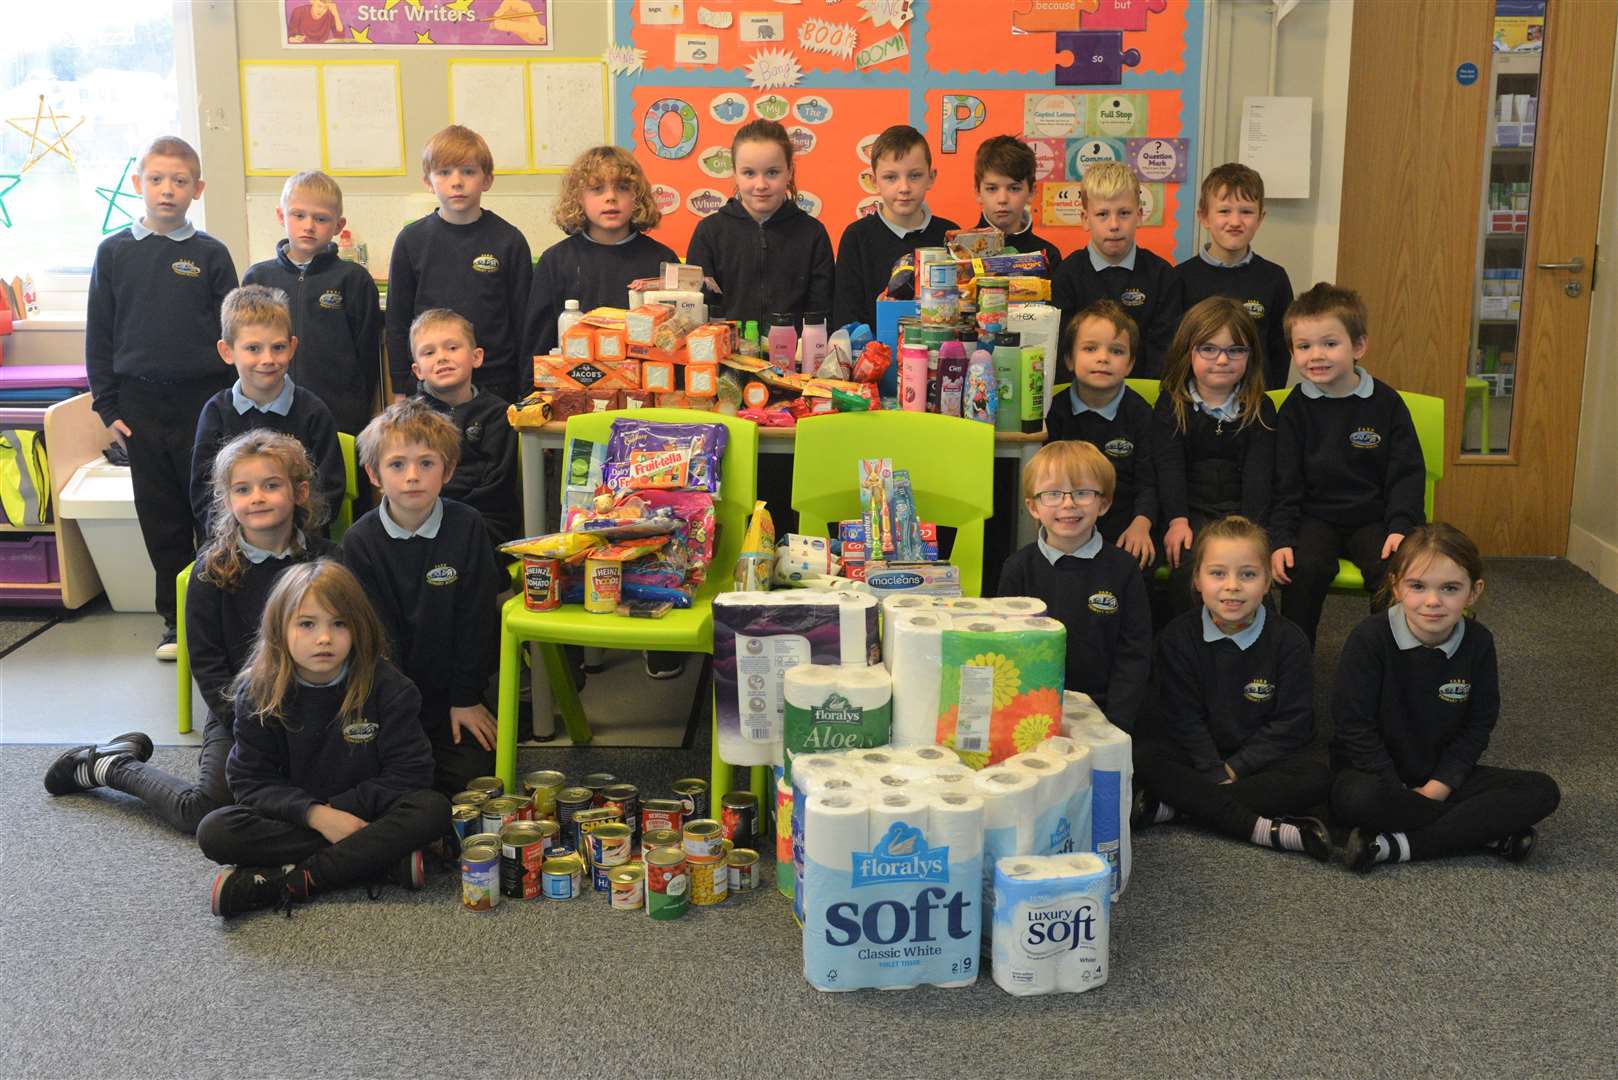 The children with the donated items.